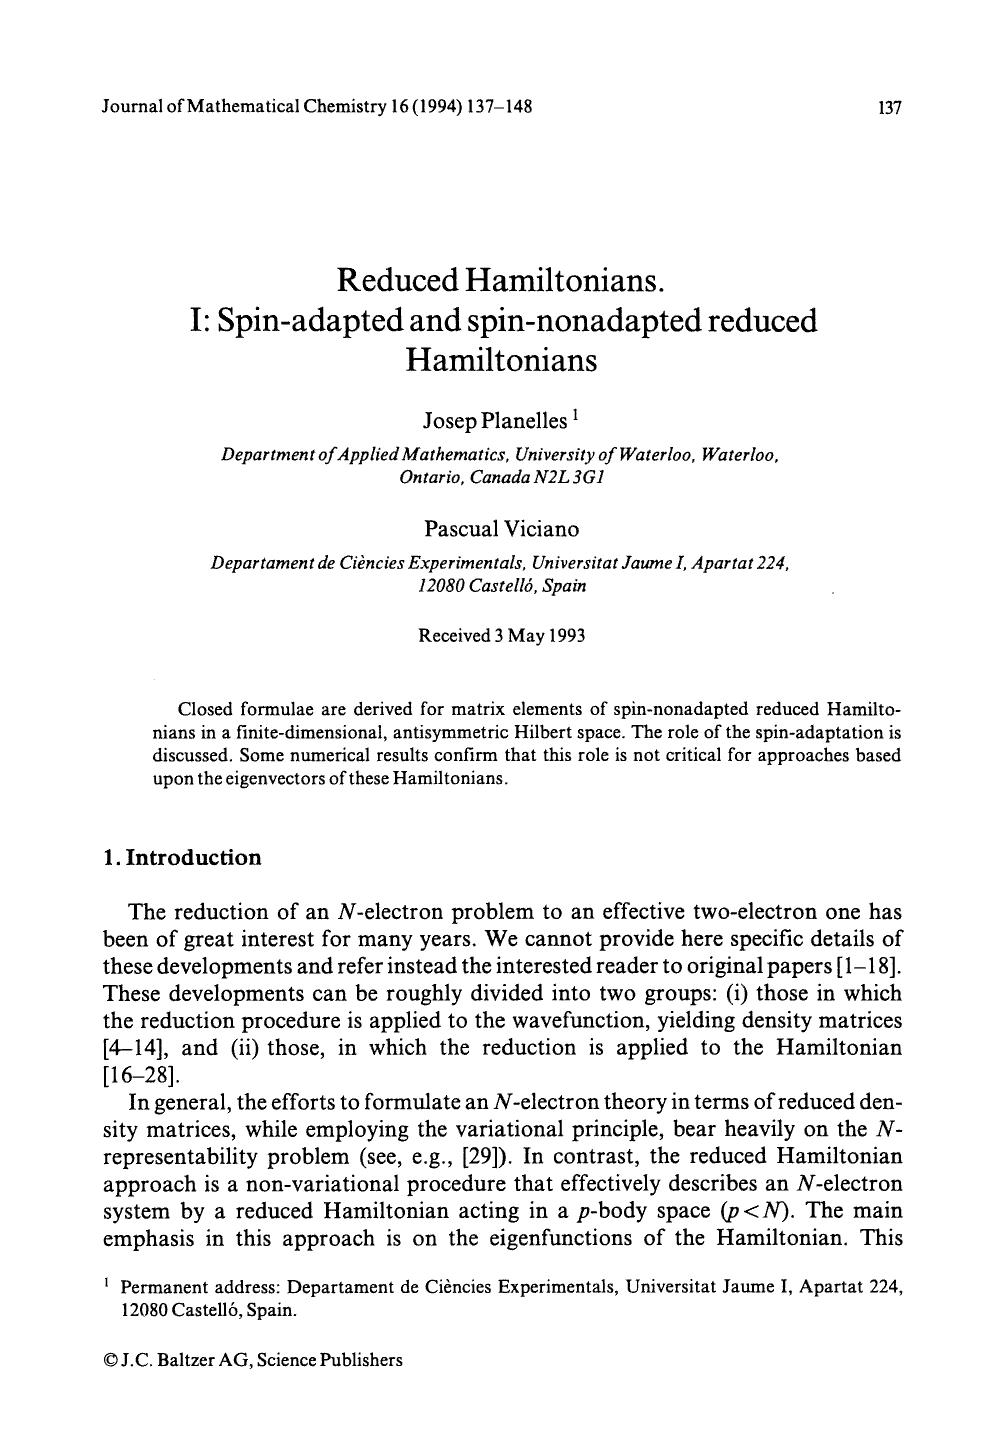 Reduced Hamiltonians. I: Spin-adapted and spin-nonadapted reduced Hamiltonians by Unknown